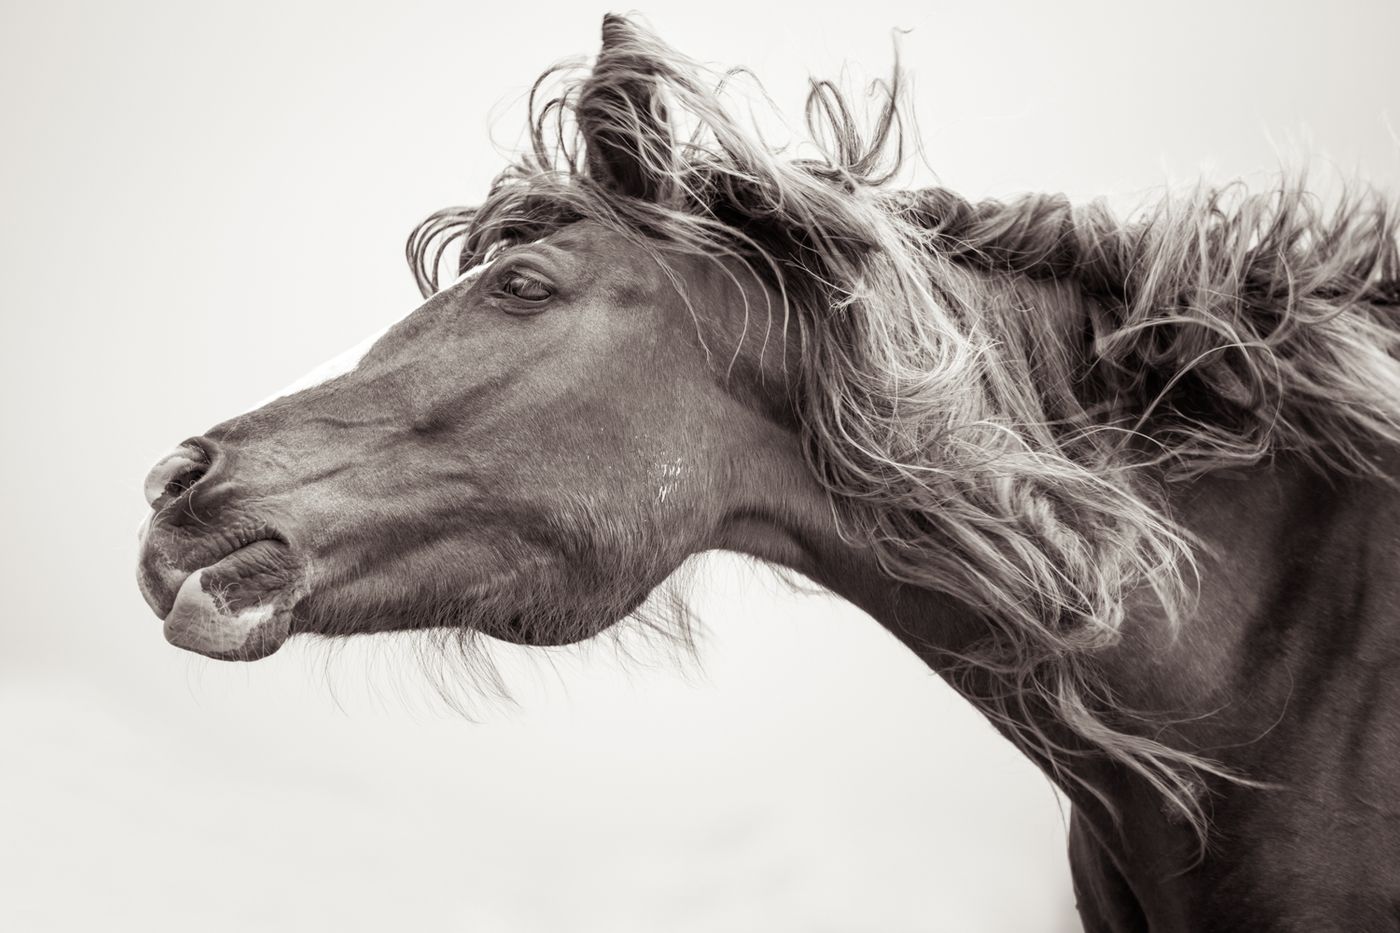 A Wild Mustang Shakes its Mane Out in a Photo by Kimerlee Curyl